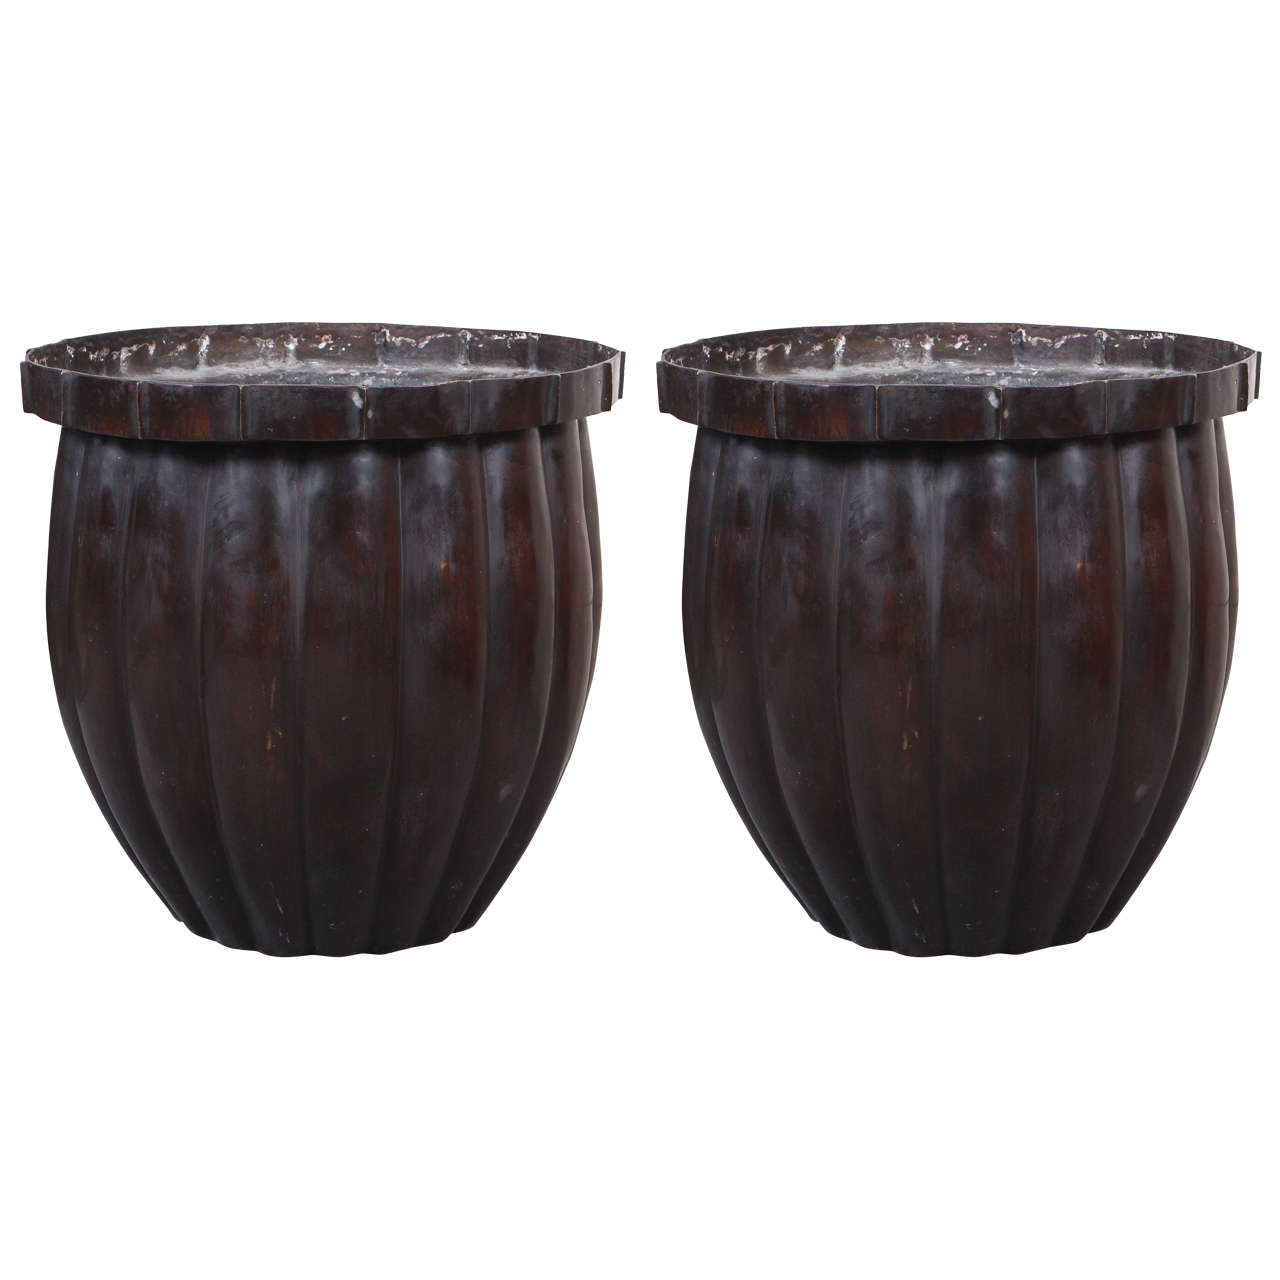 Pair of Very Large Bronze Colored Planters